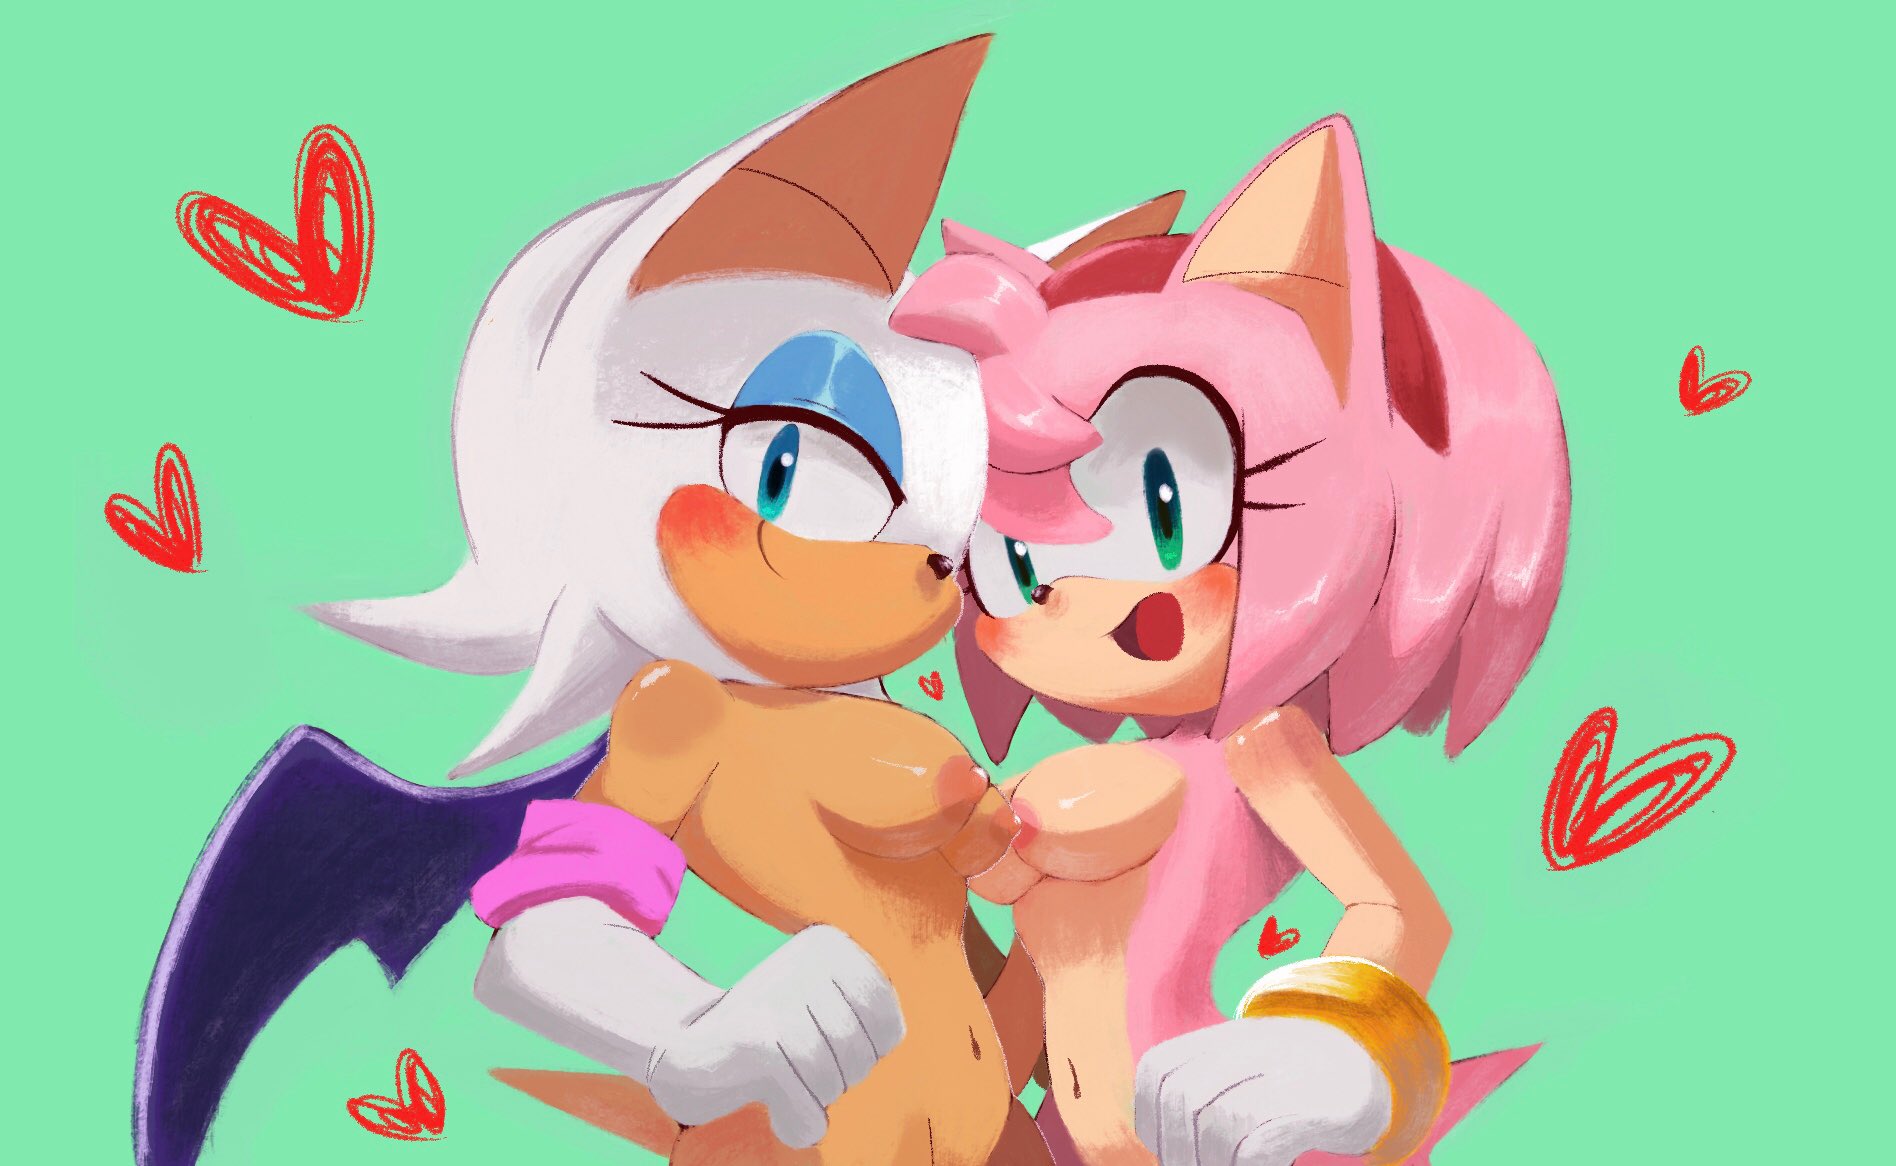 Rouge and amy nackt